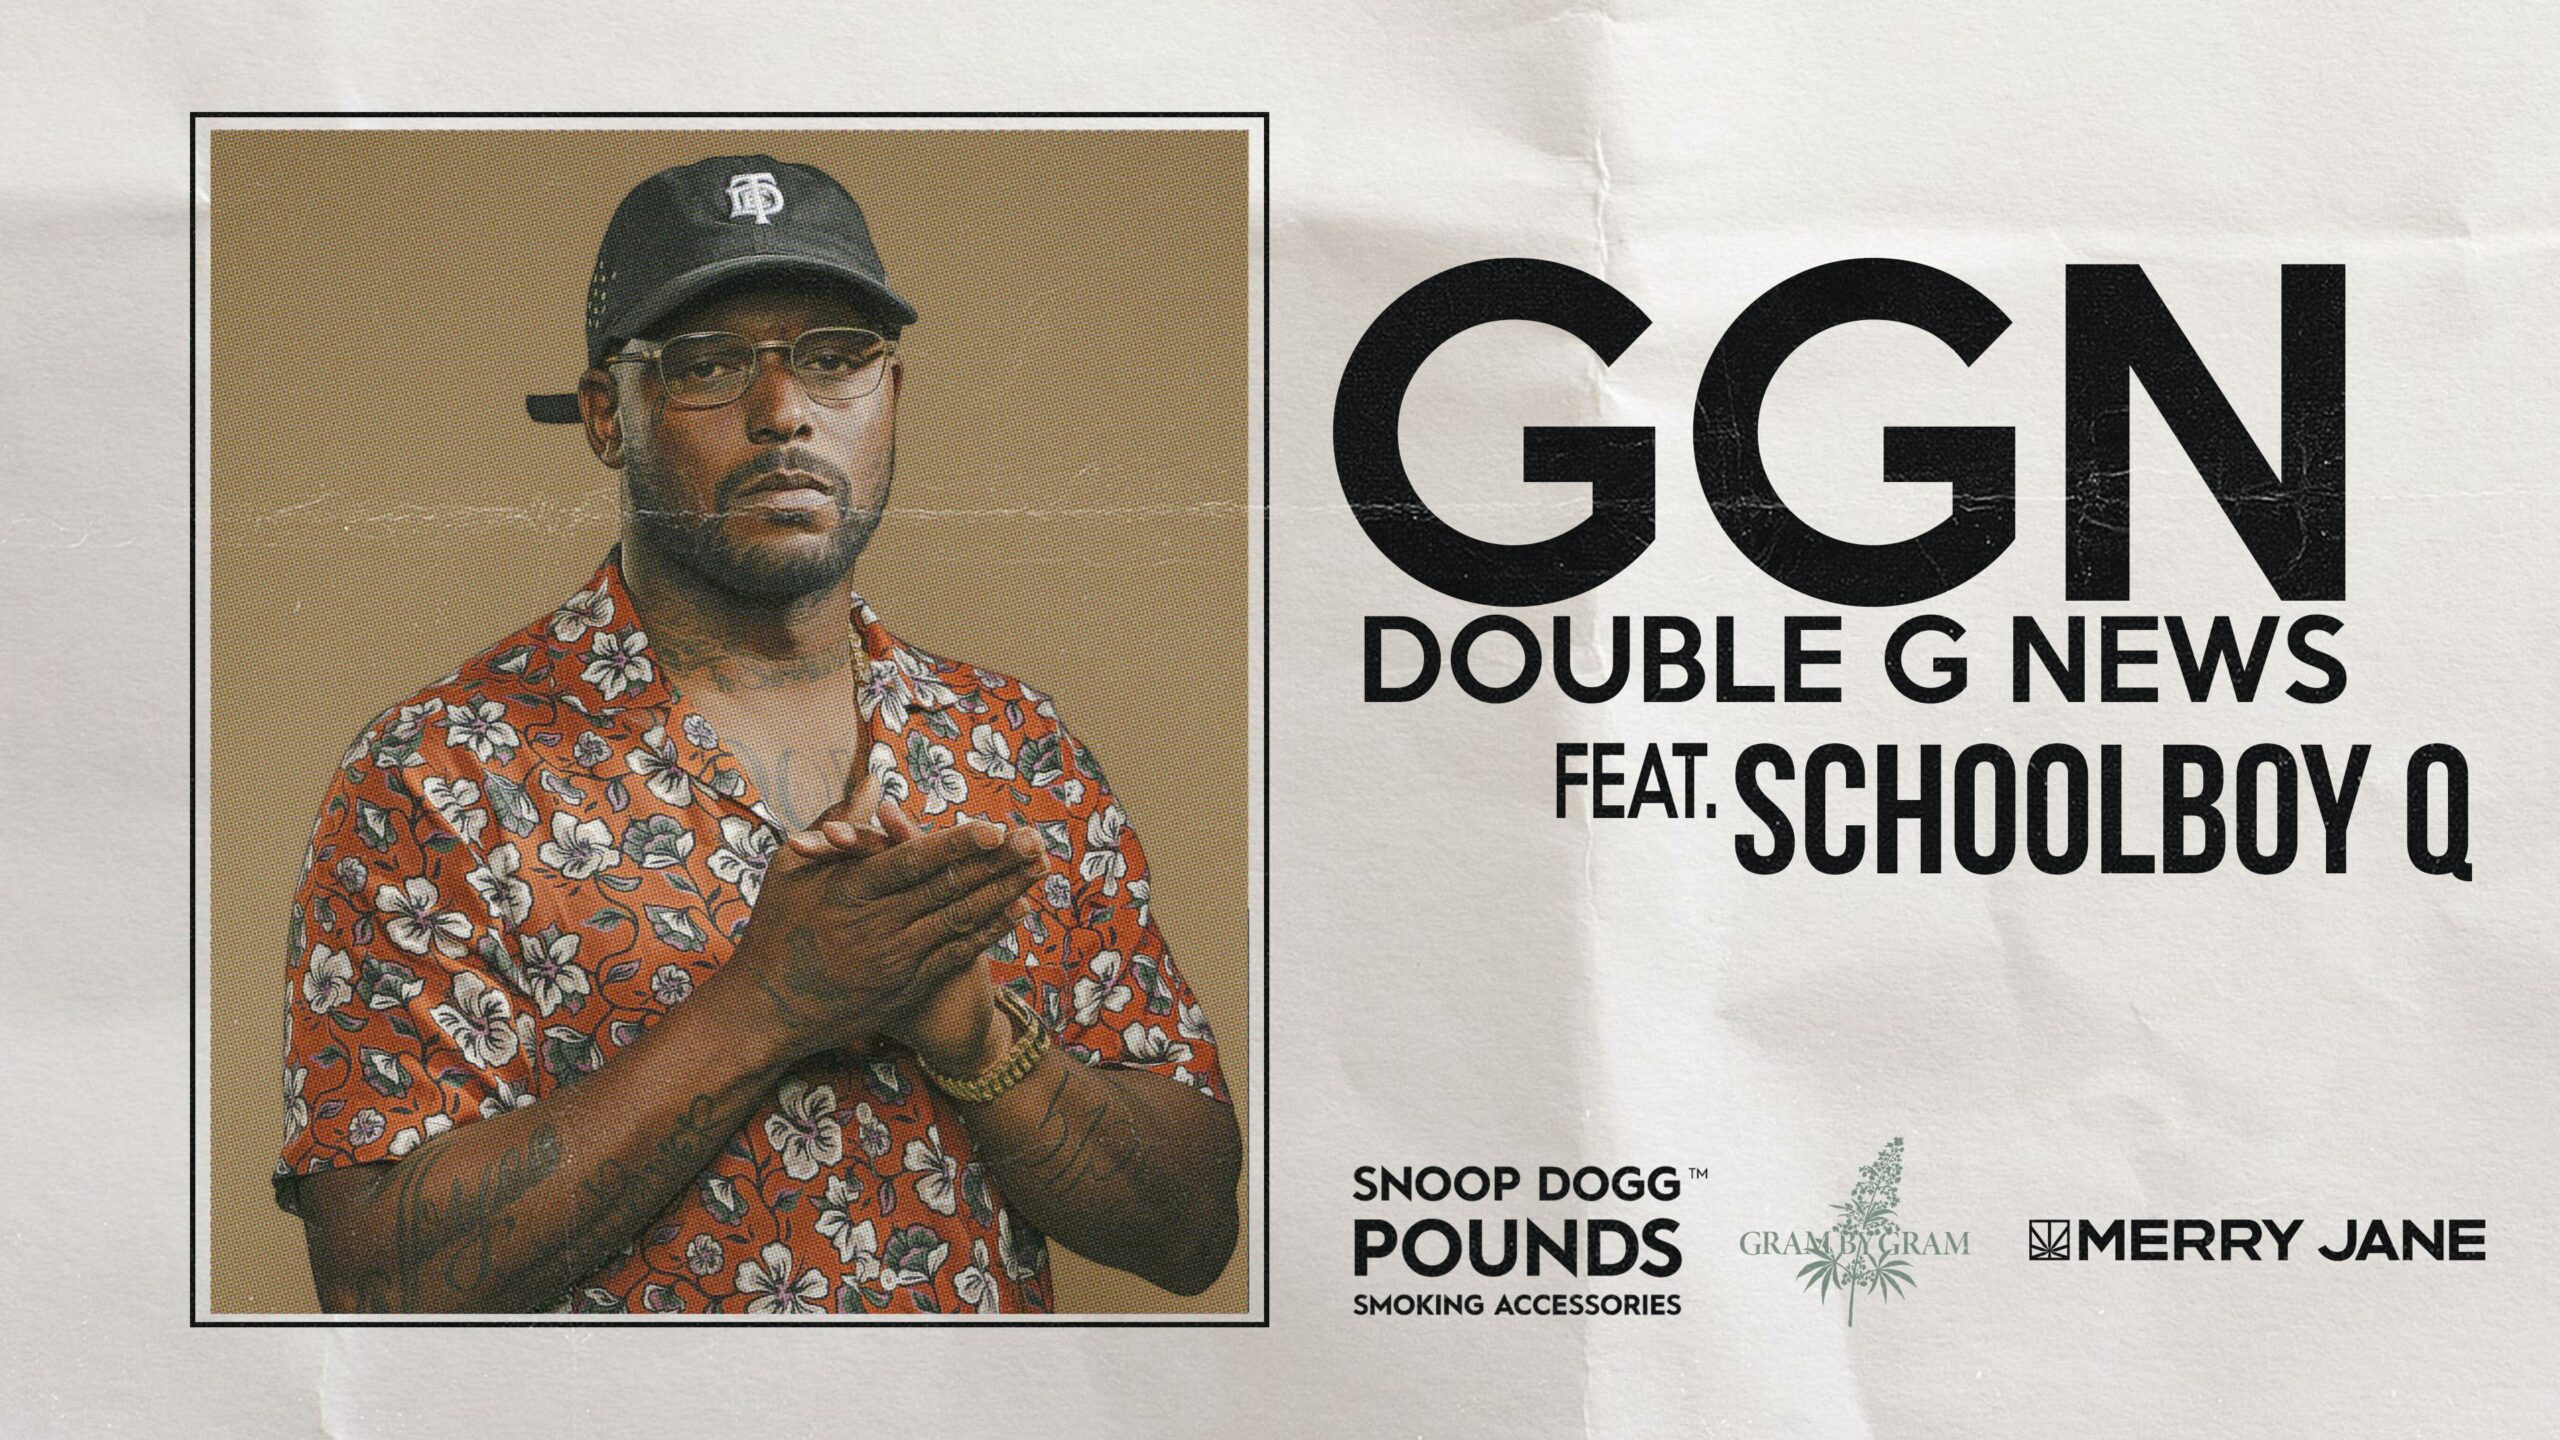 GGN Double Groovy News With Schoolboy Q & Snoop Dogg